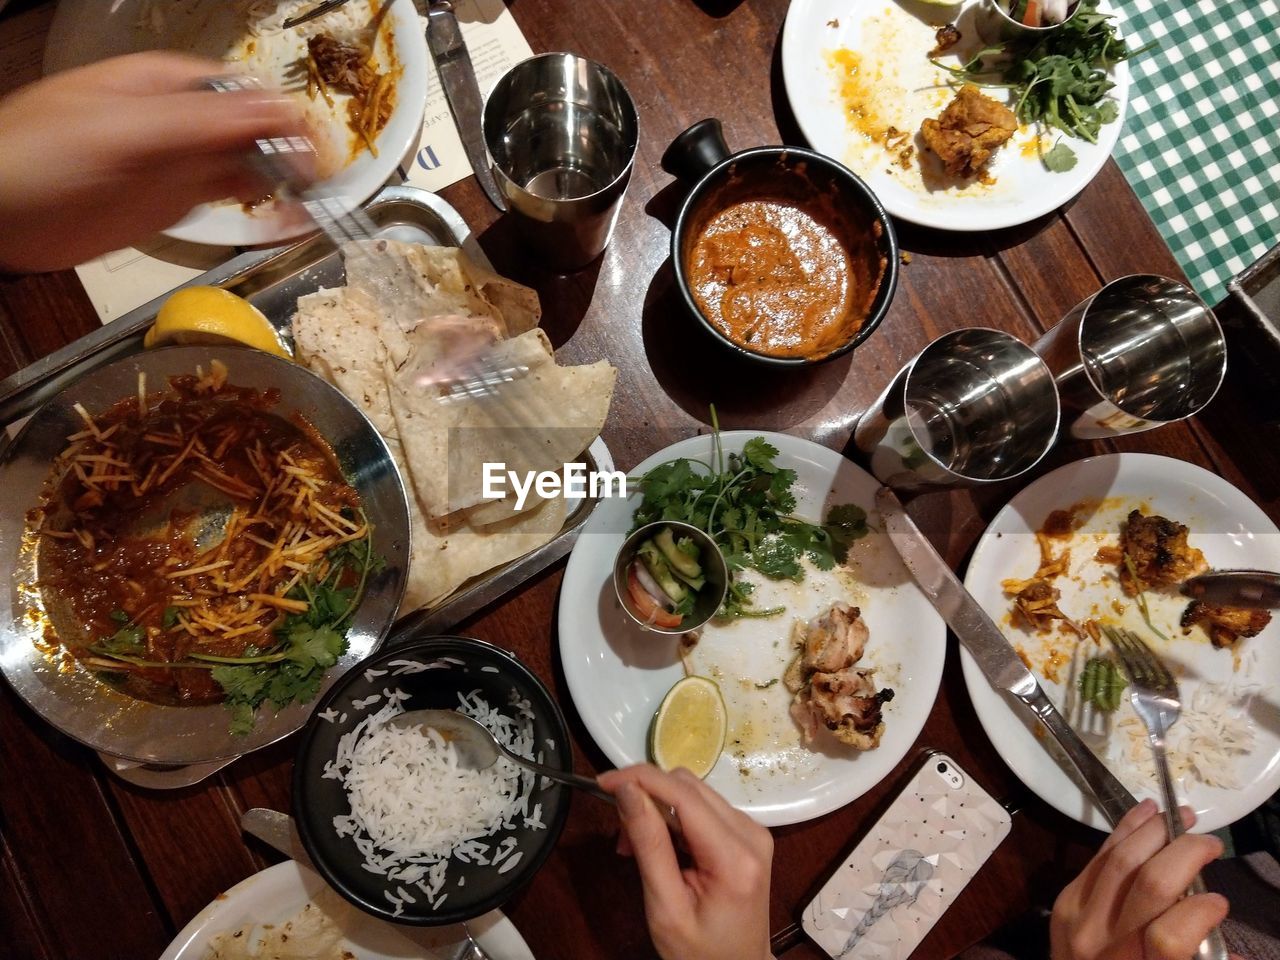 Cropped hands of people having food at dining table in restaurant